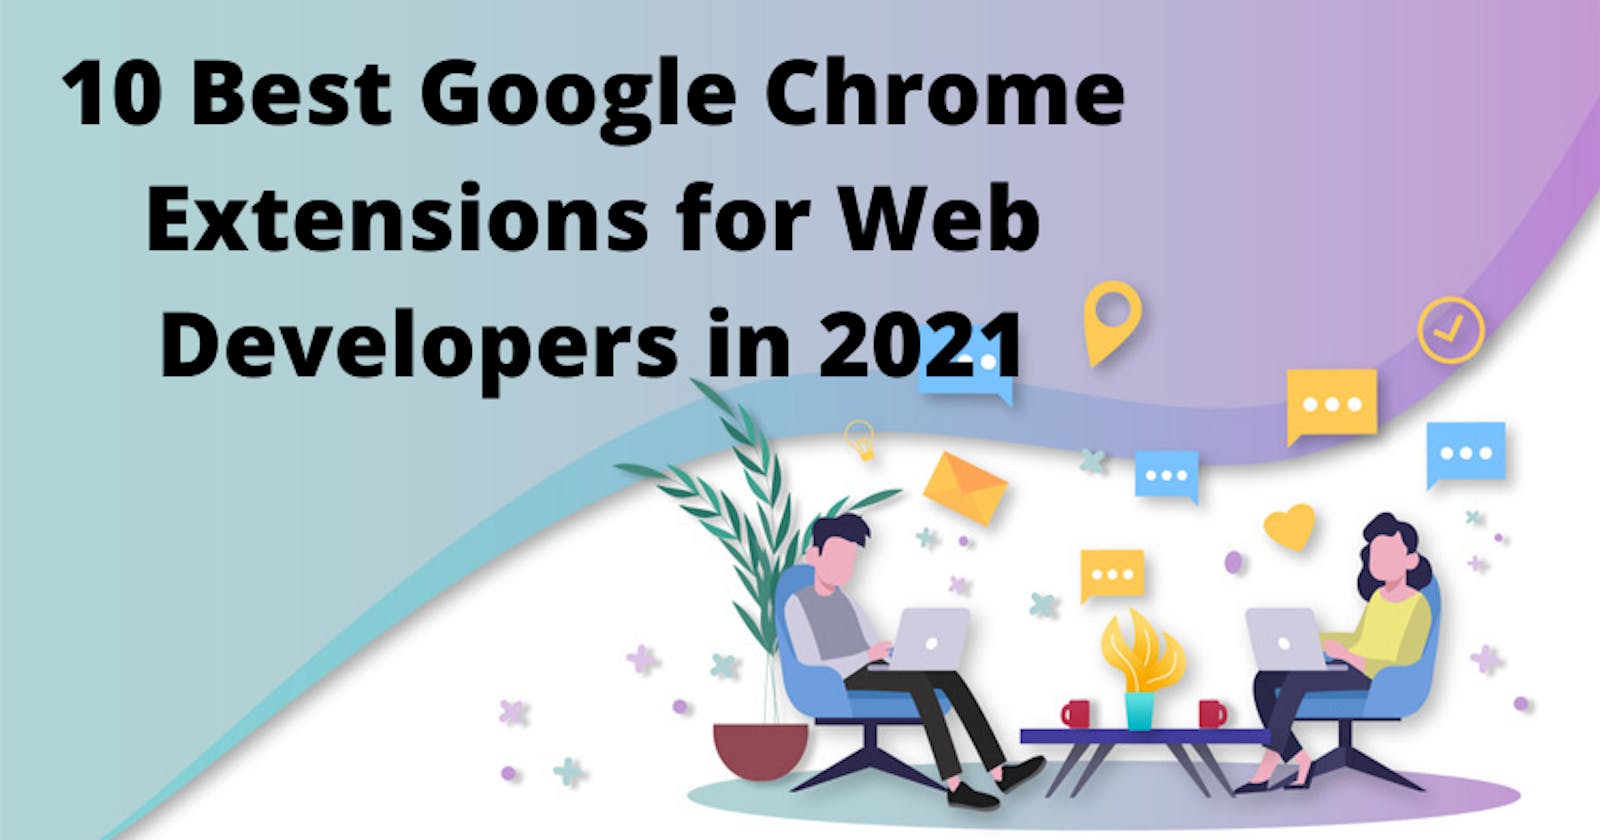 10 Best Google Chrome Extensions for Web Developers in 2021